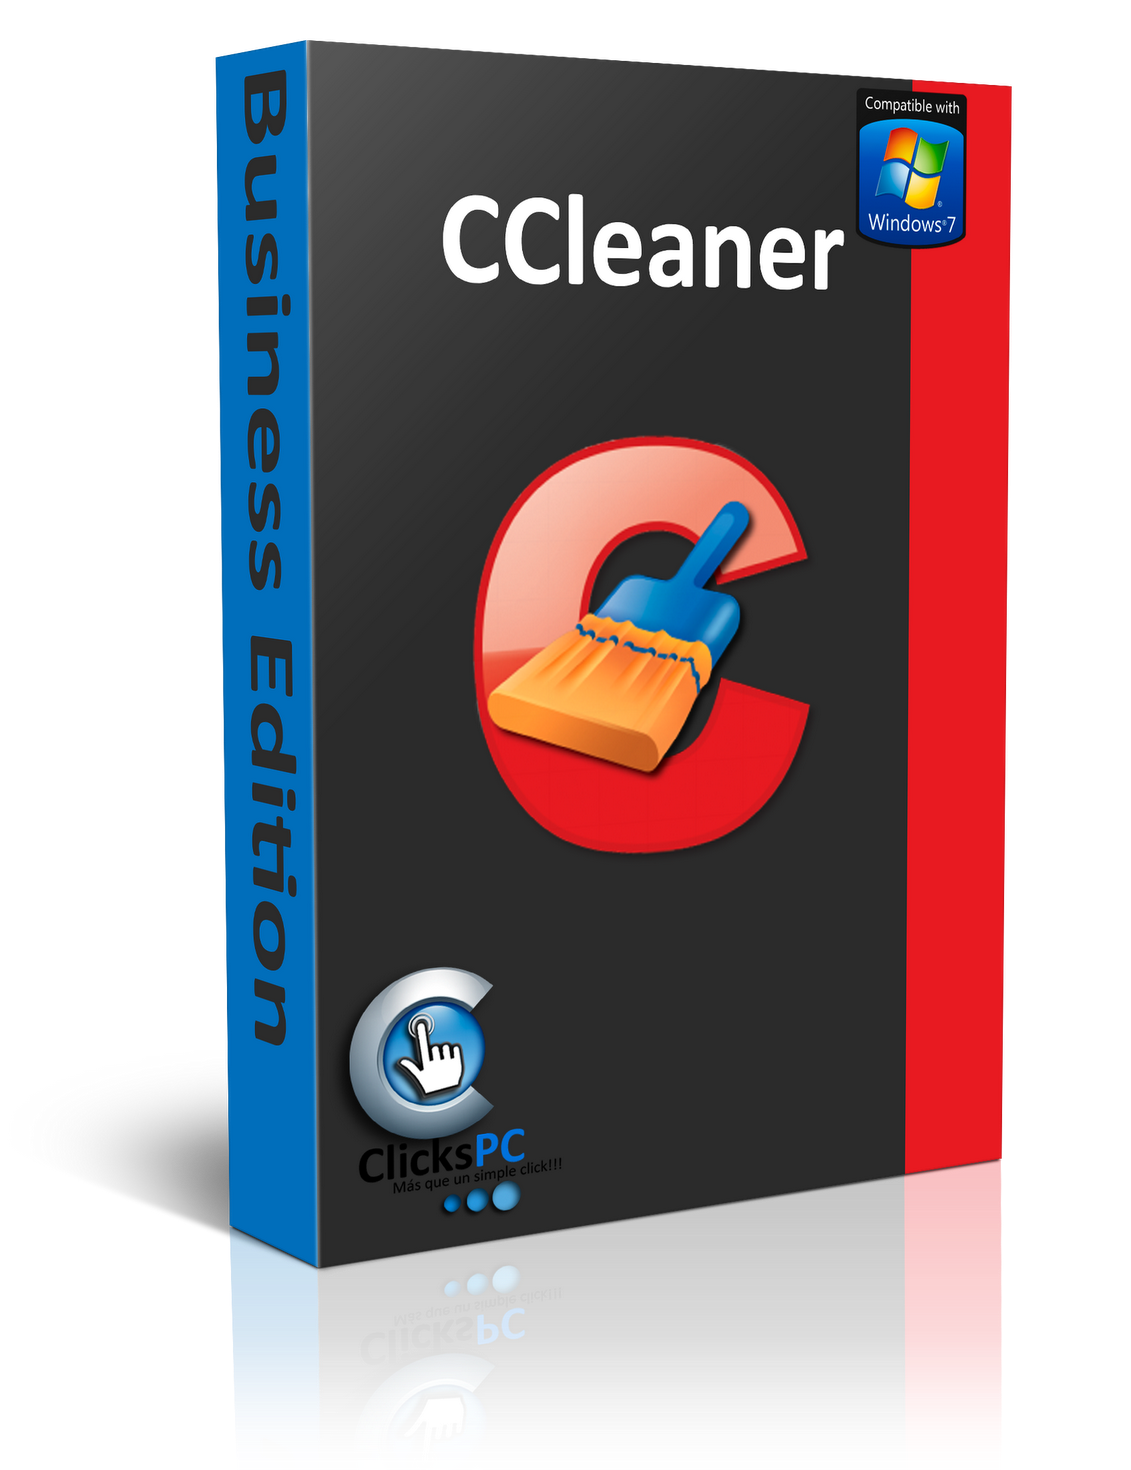 download ccleaner free full version windows 8